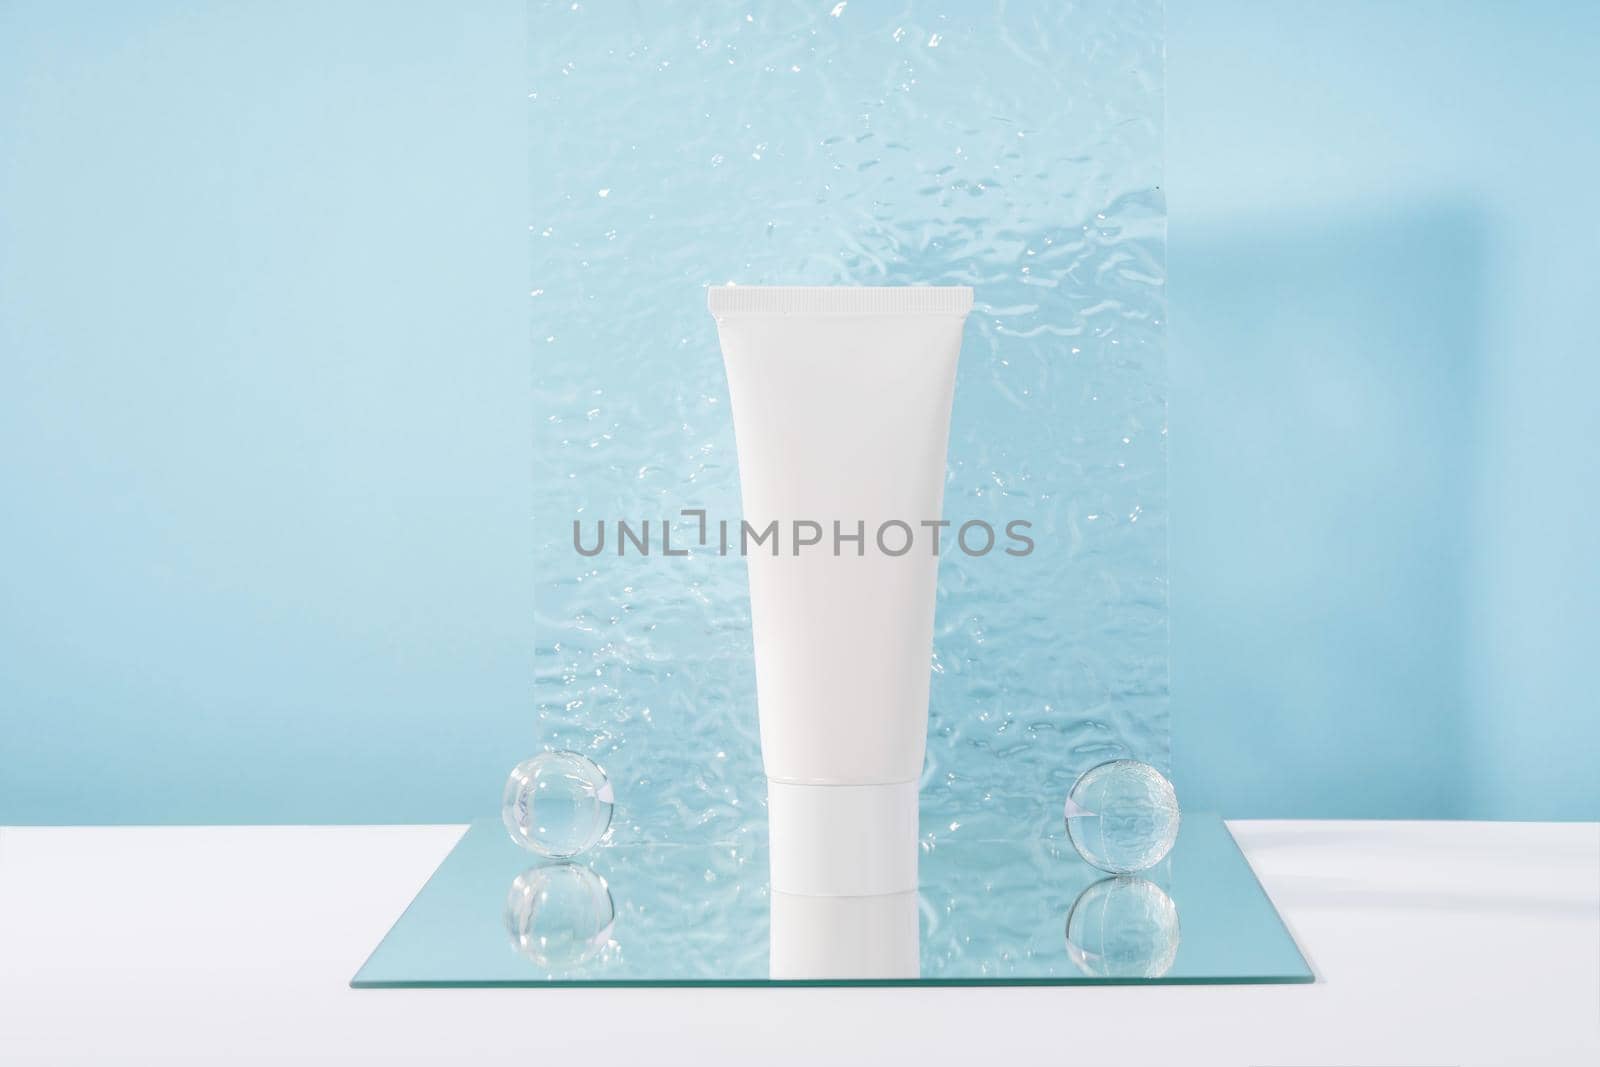 Unbranded cosmetic cream white plastic tube mockup on blue background with stylish props, mirror and glass balls, acrylic plate. Body and health care beauty product packaging by photolime